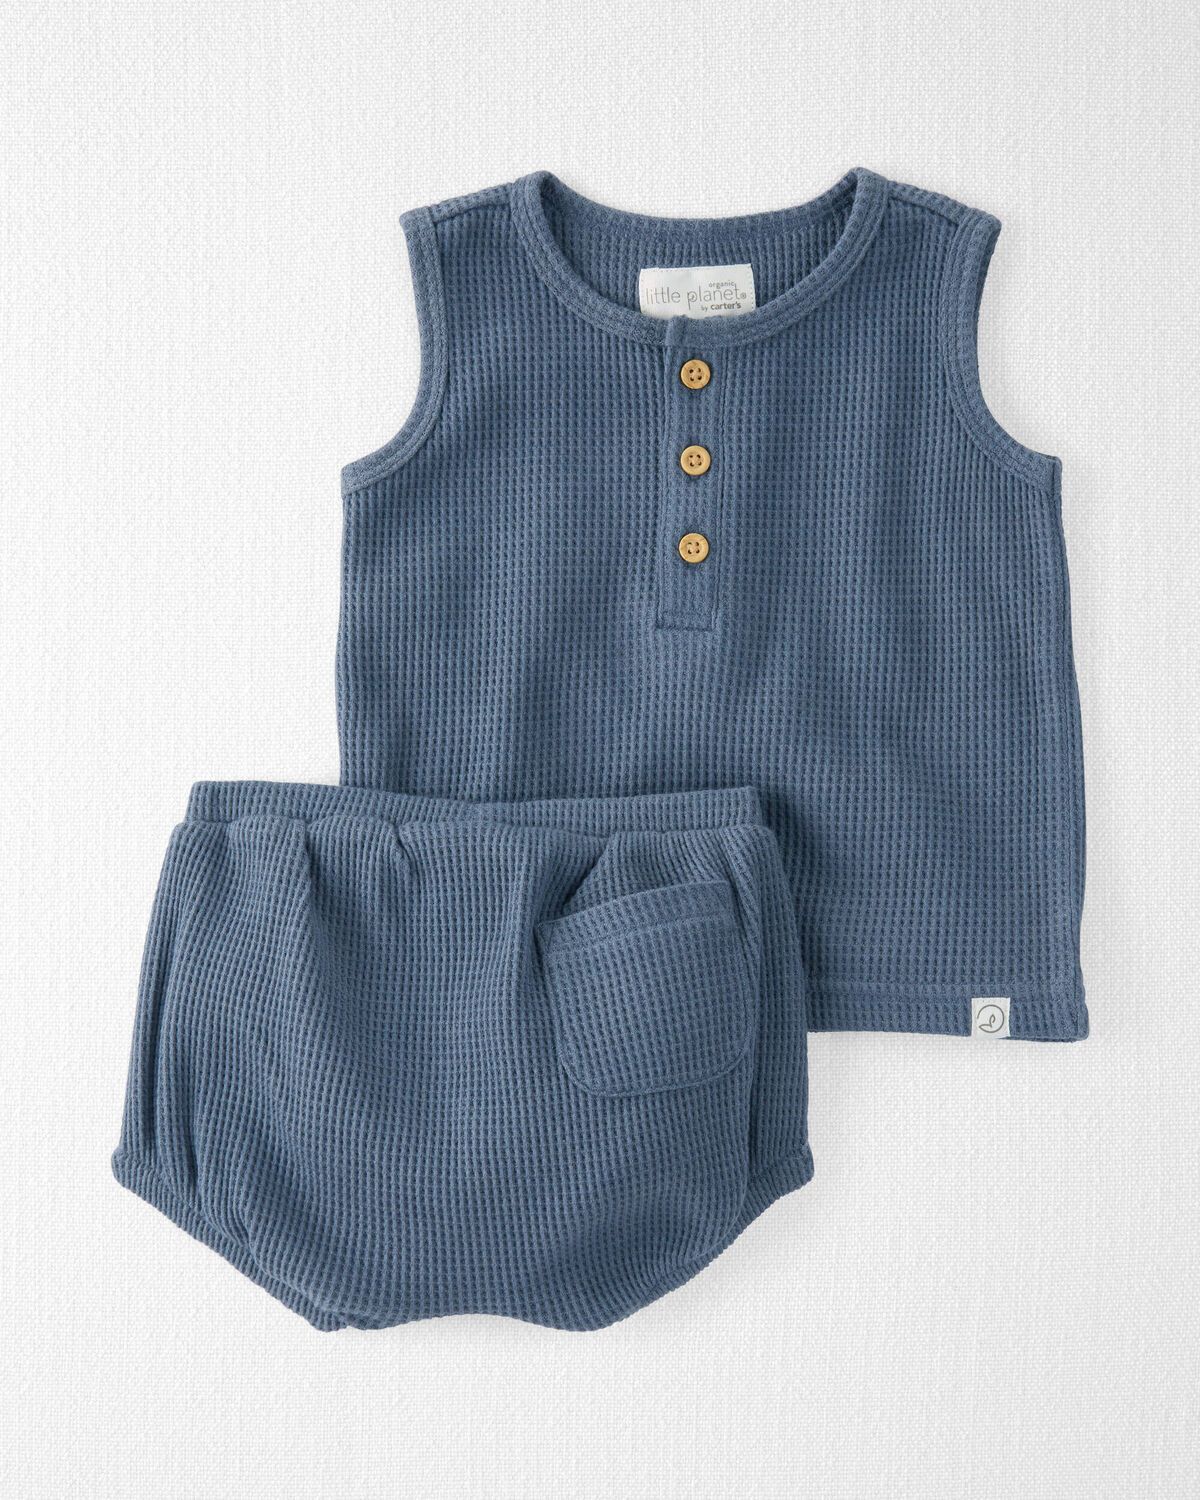 Coastal Blue Baby 2-Piece Waffle Knit Bubble Shorts Set Made with Organic Cotton | carters.com | Carter's